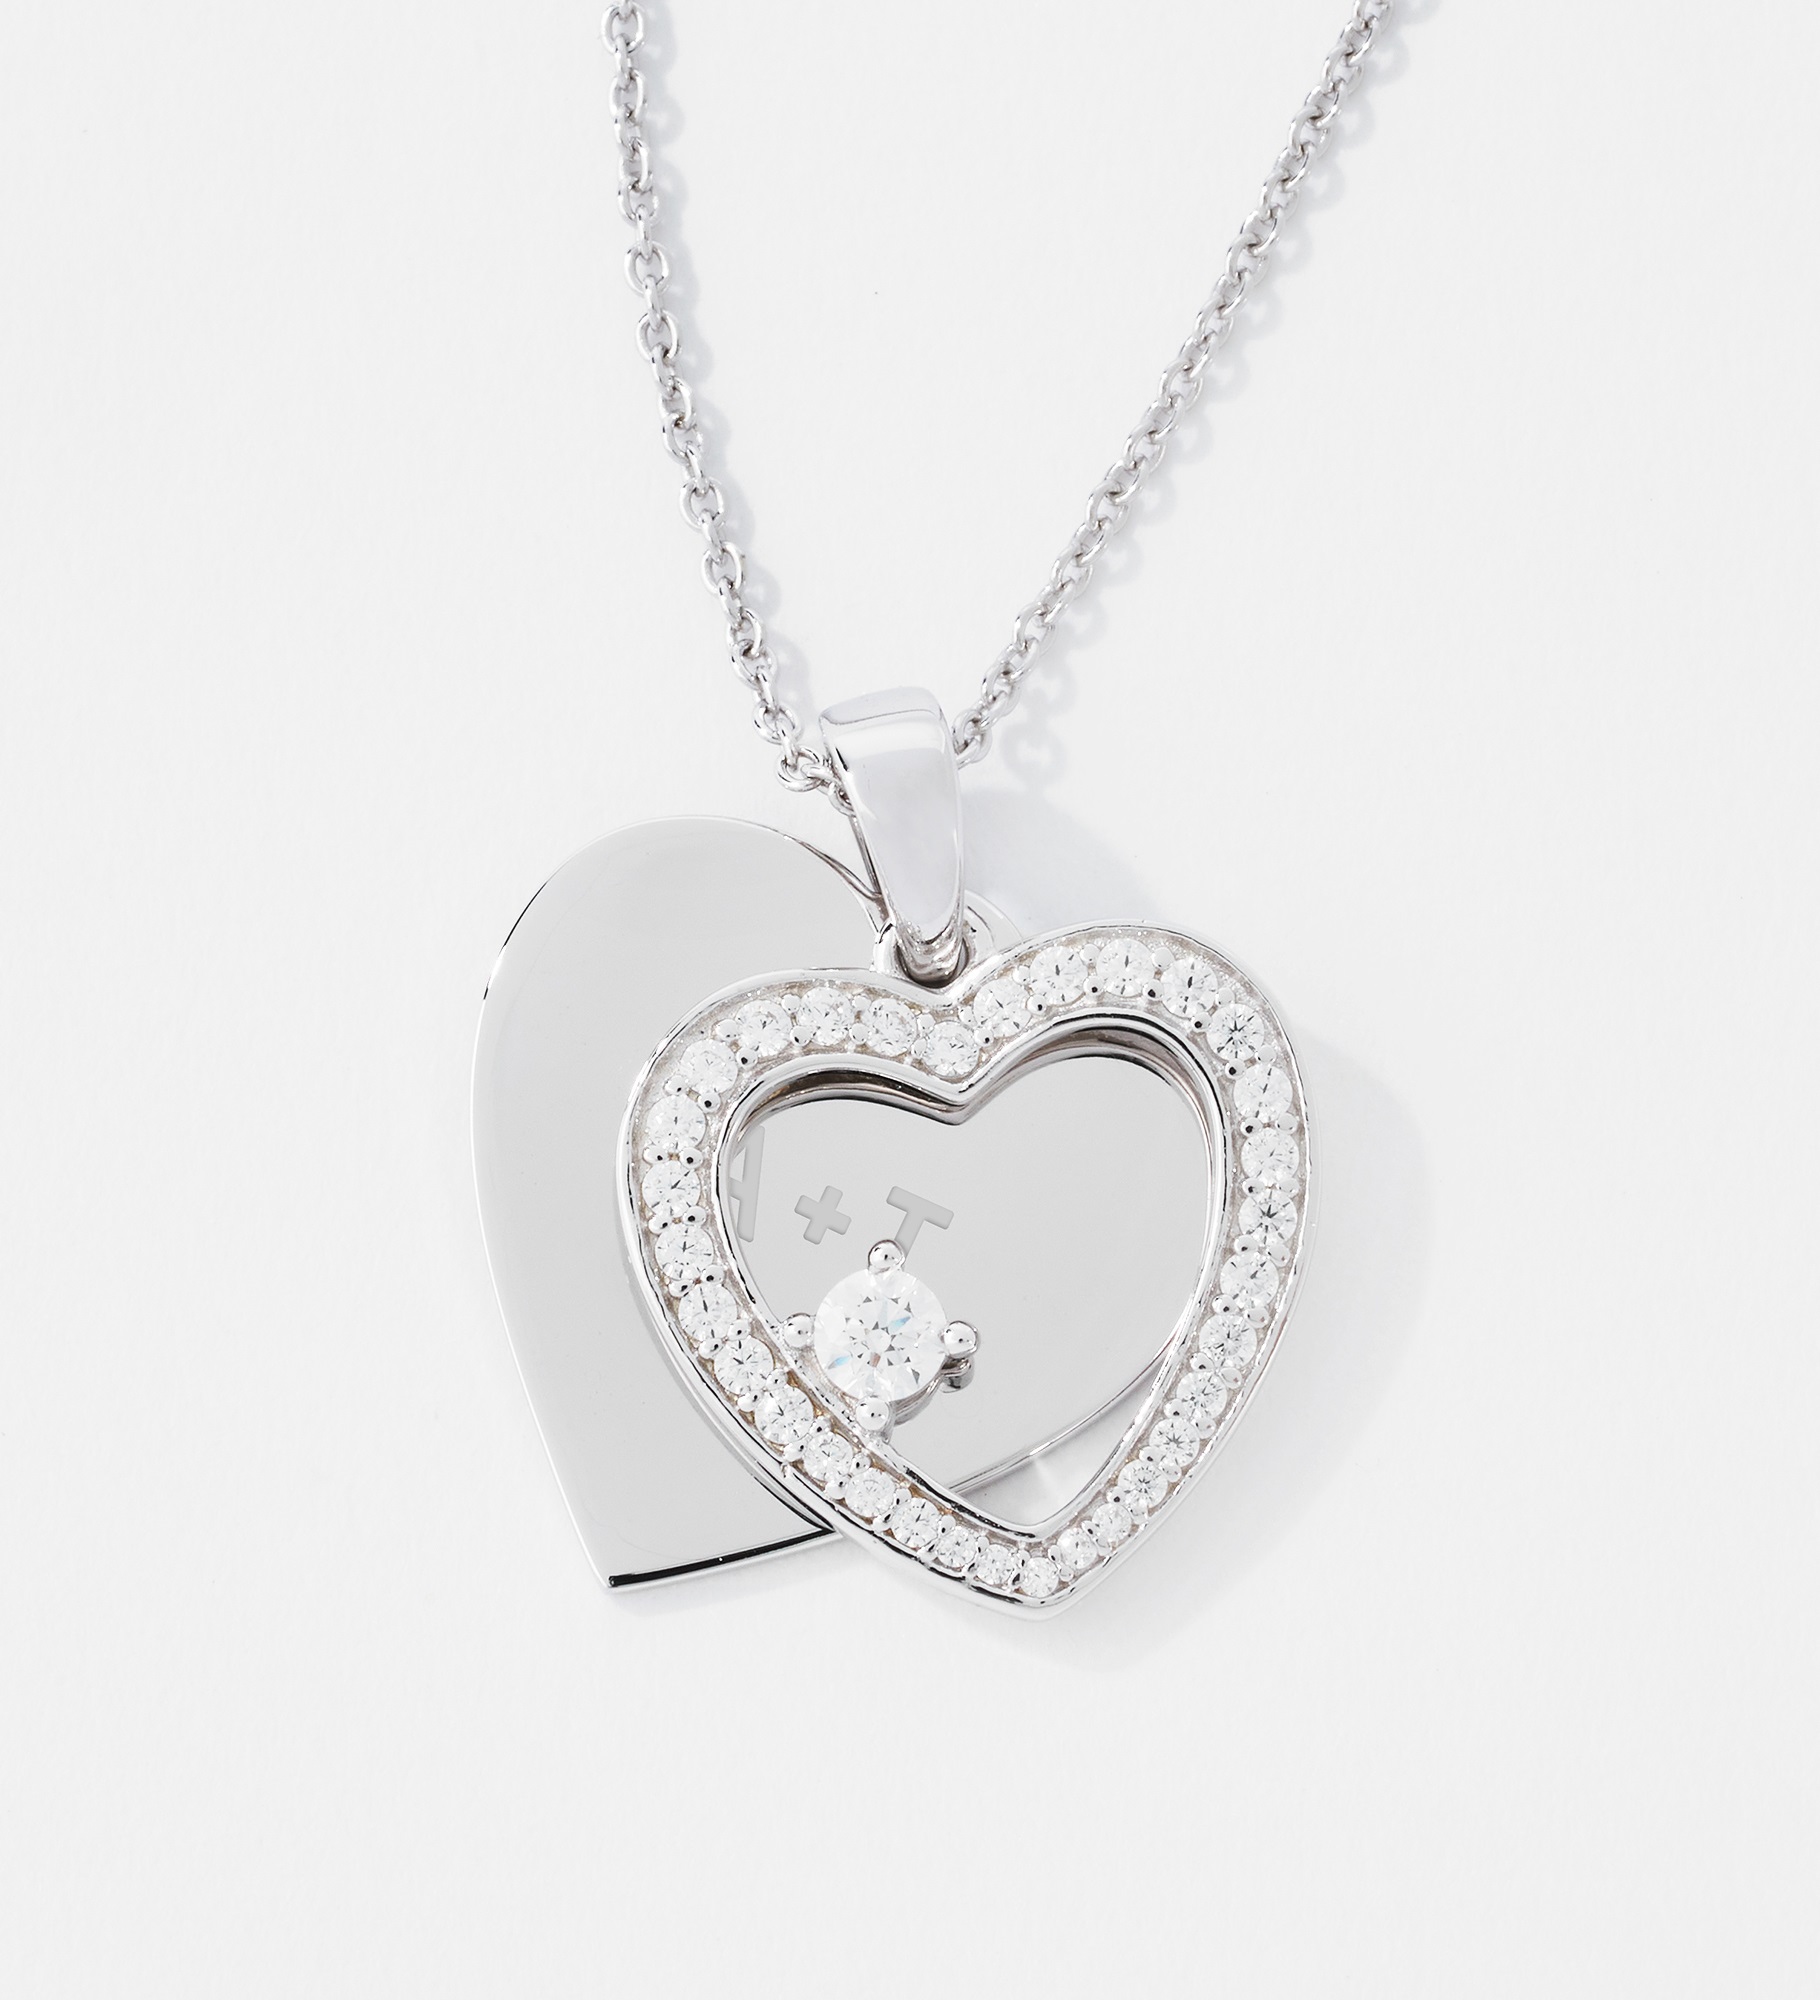 Engraved Sterling Silver Pave Heart Swing Necklace